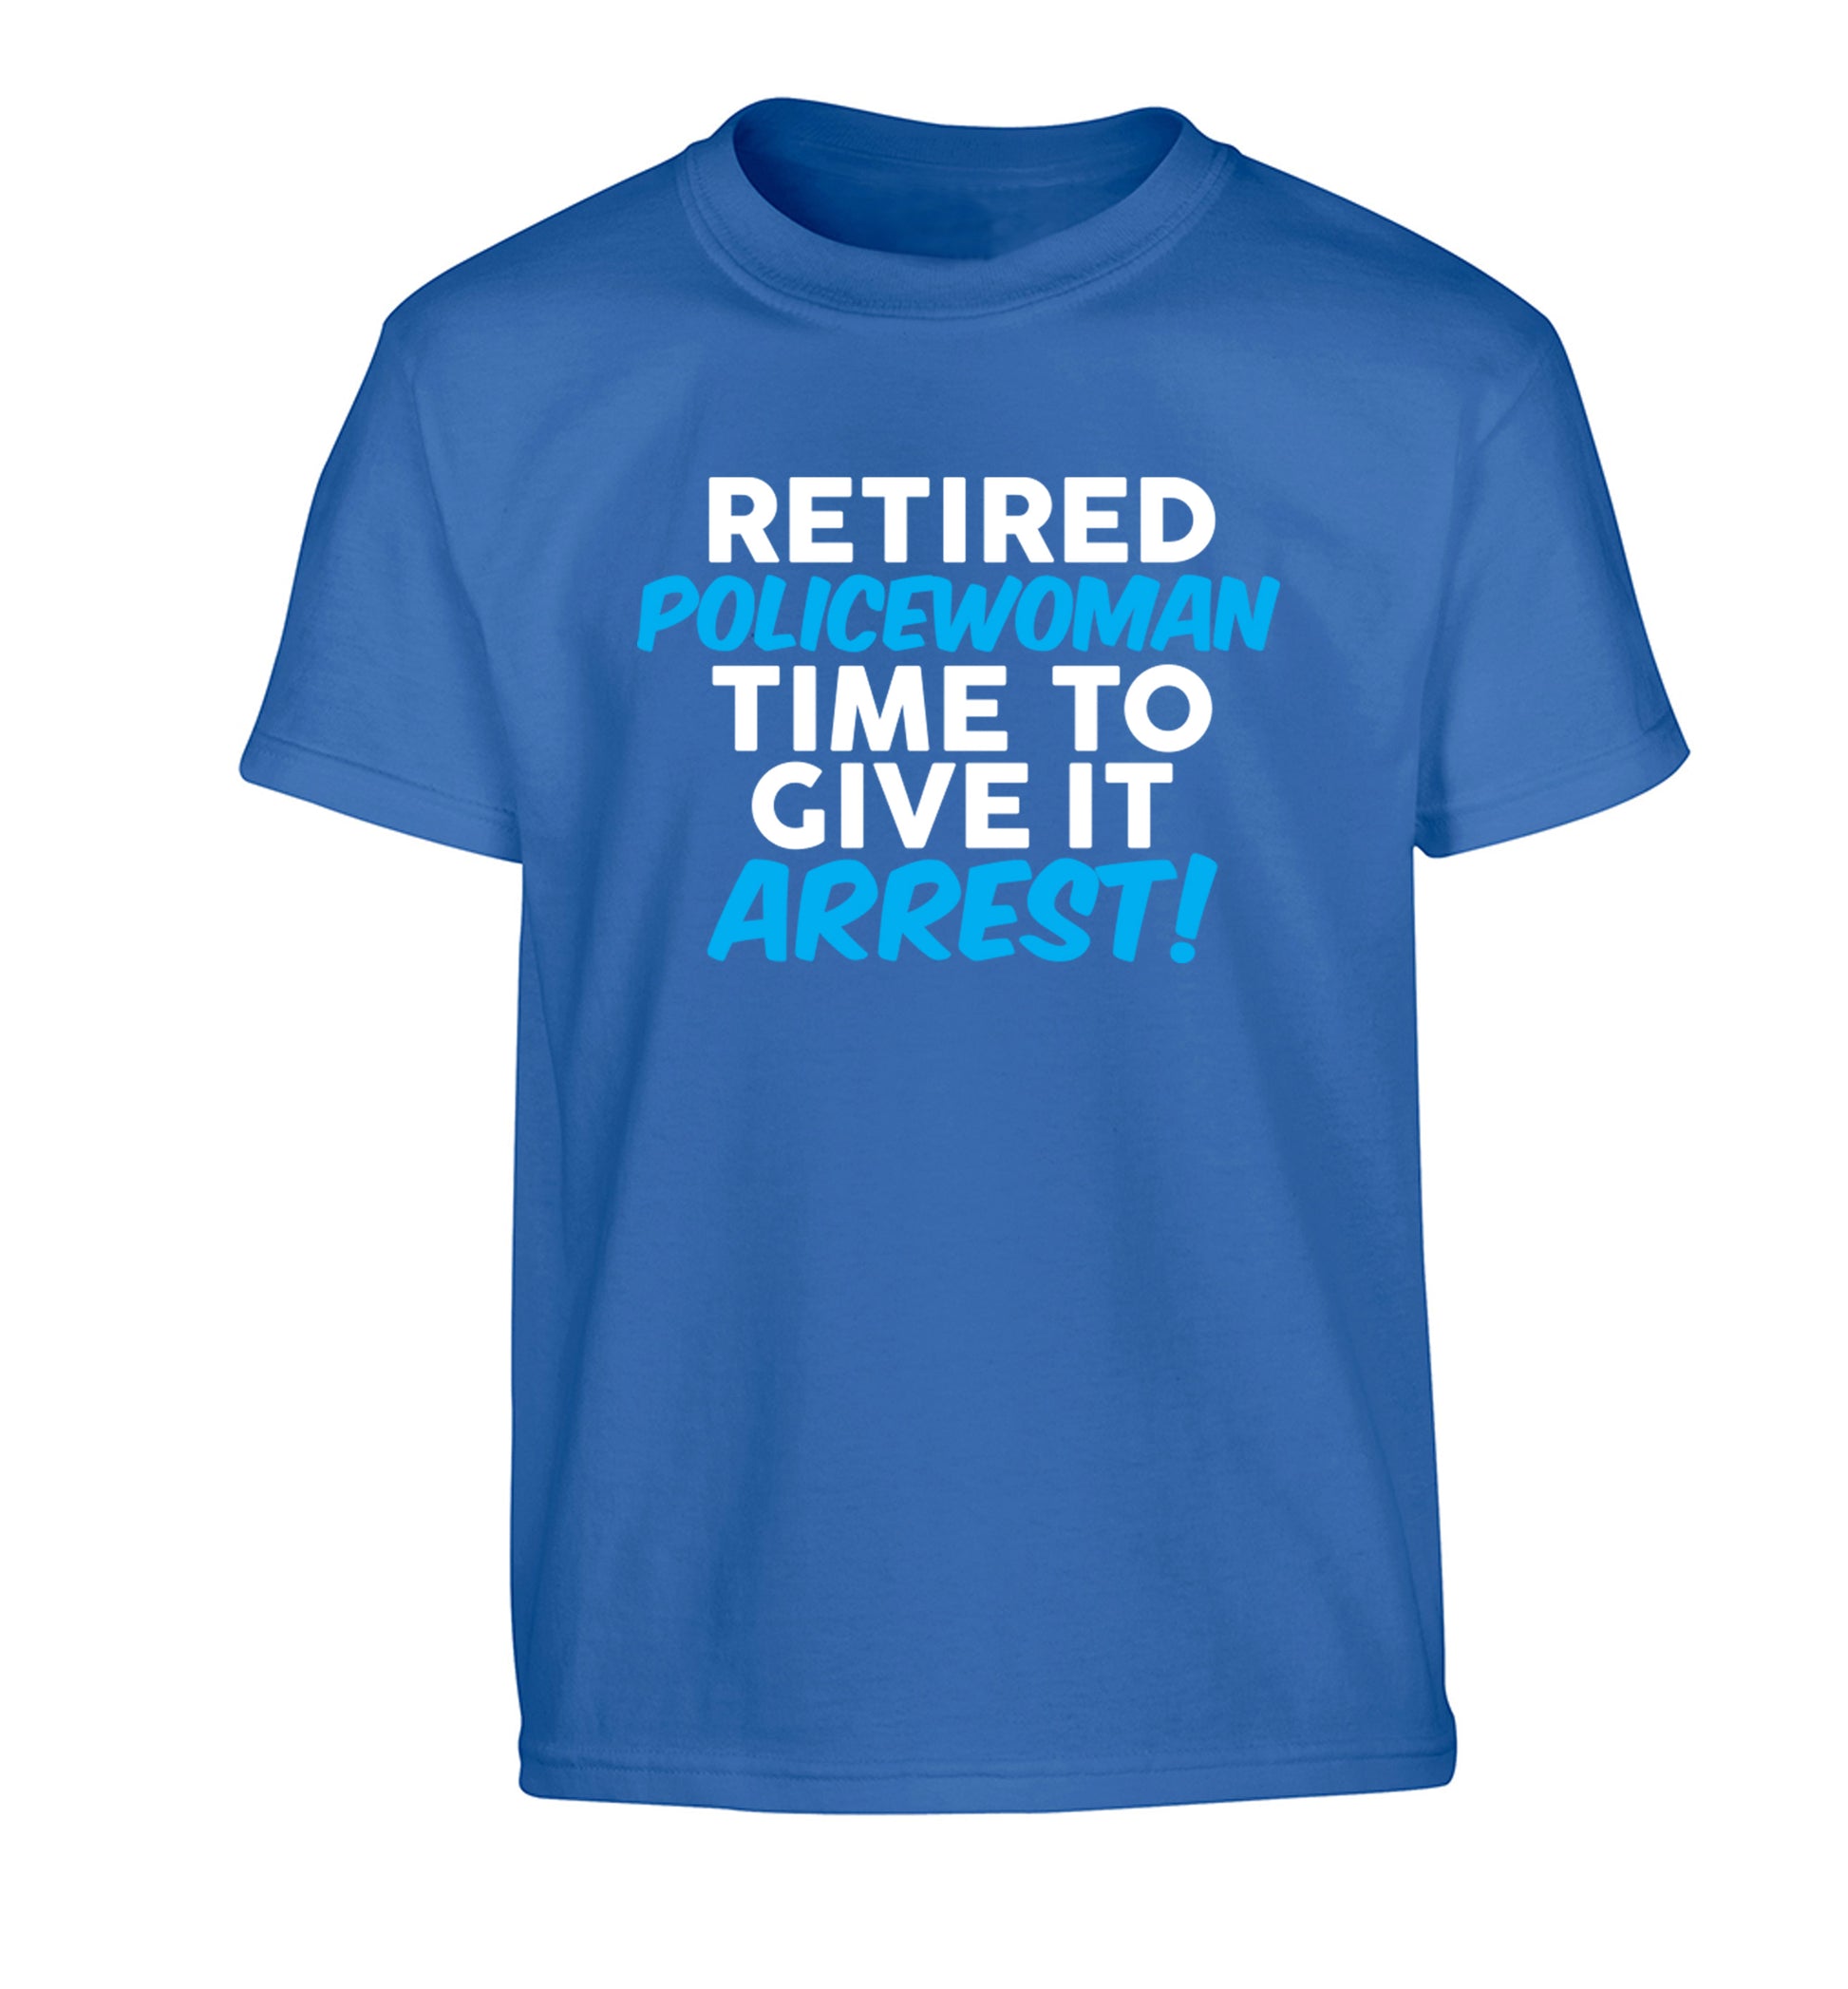 Retired policewoman time to give it arrest Children's blue Tshirt 12-13 Years